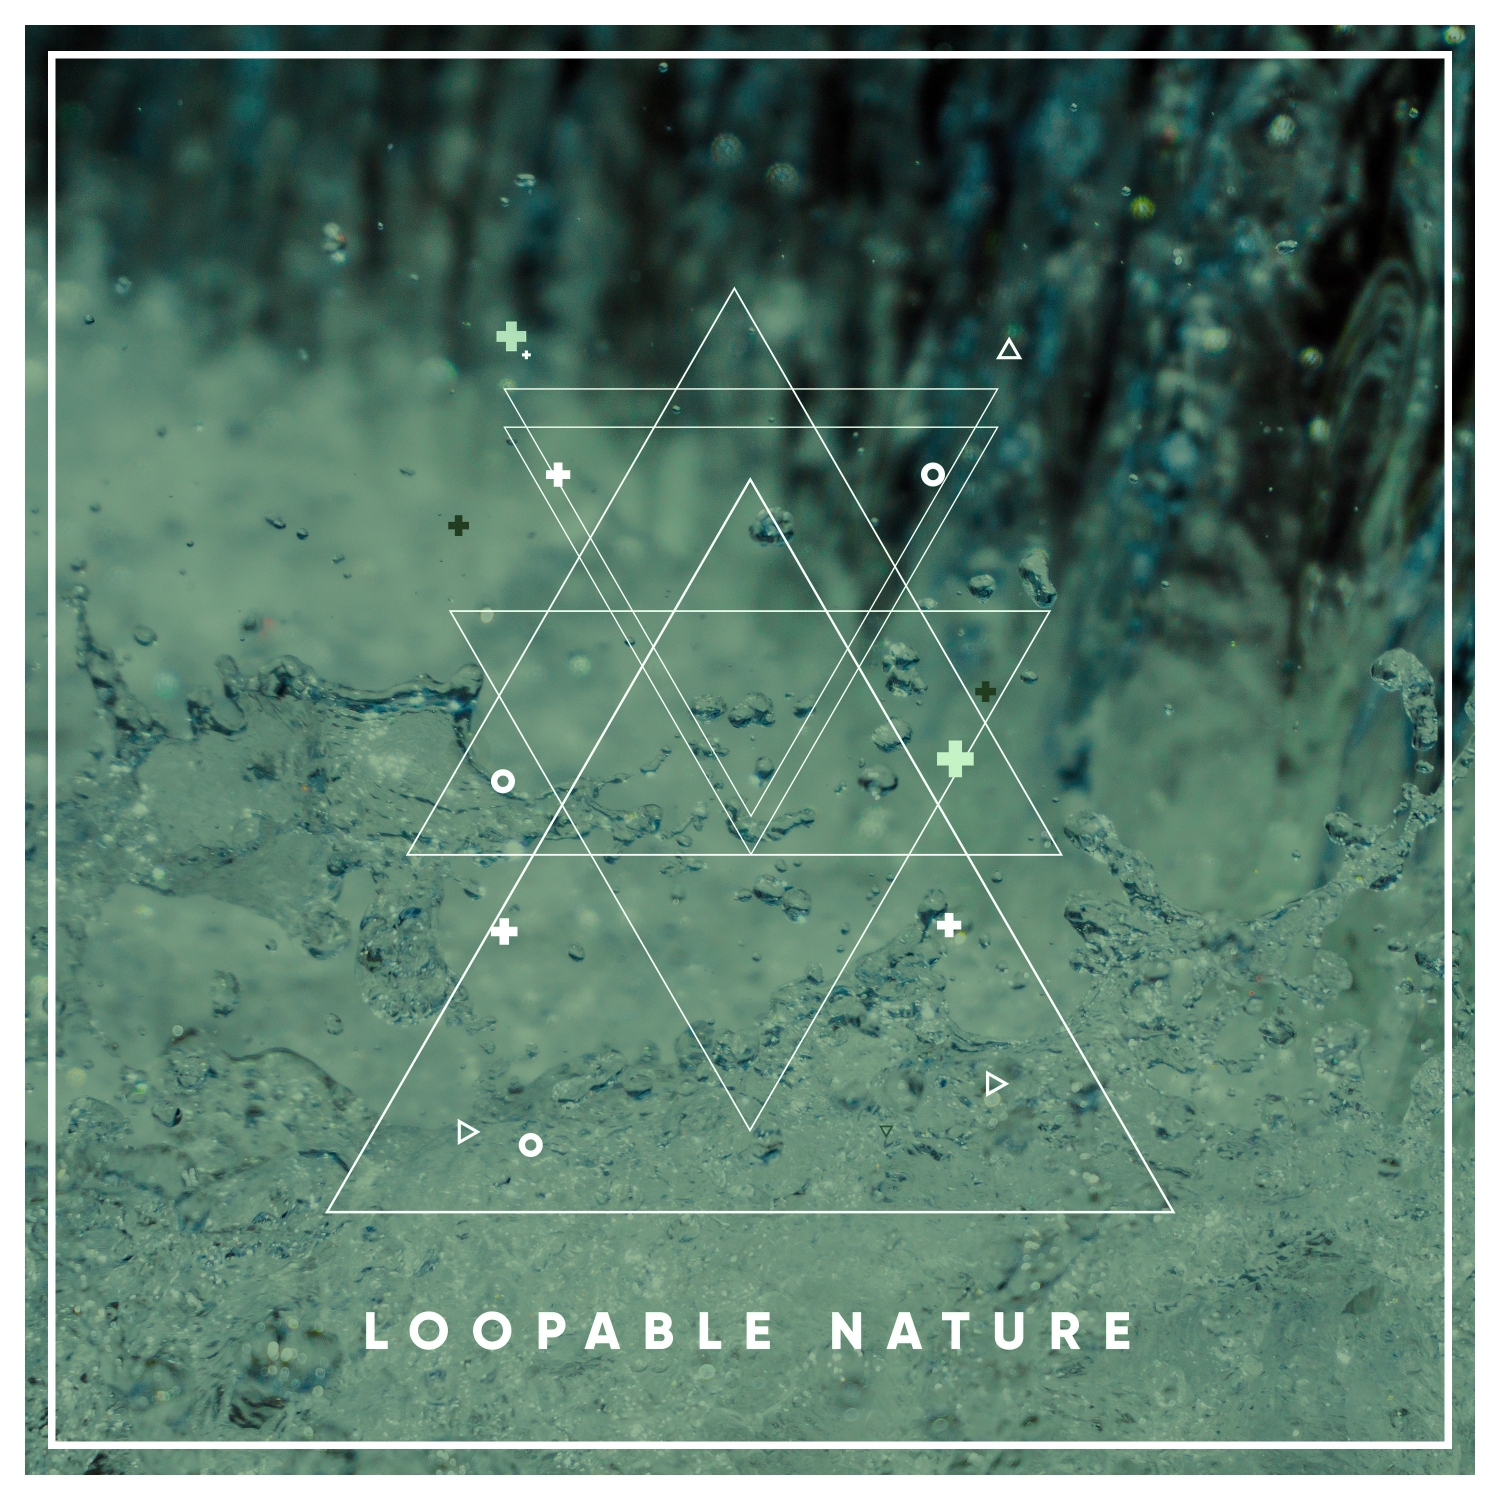 15 Loopable Nature and Ocean Sounds